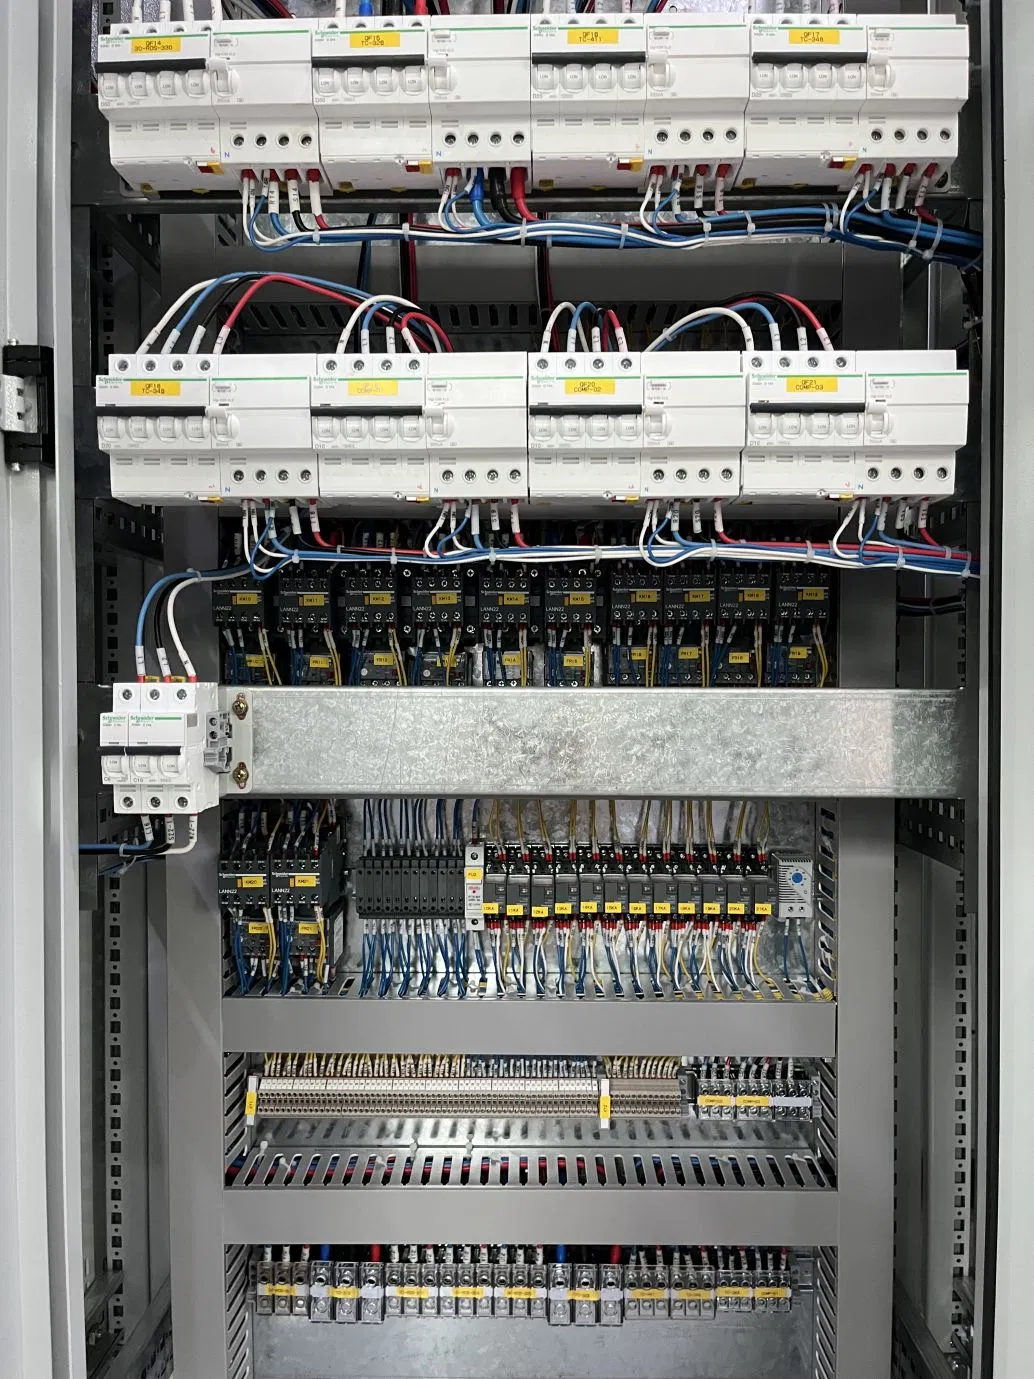 Fk2 Used for Mining Engineering 90kw a Distribution Board